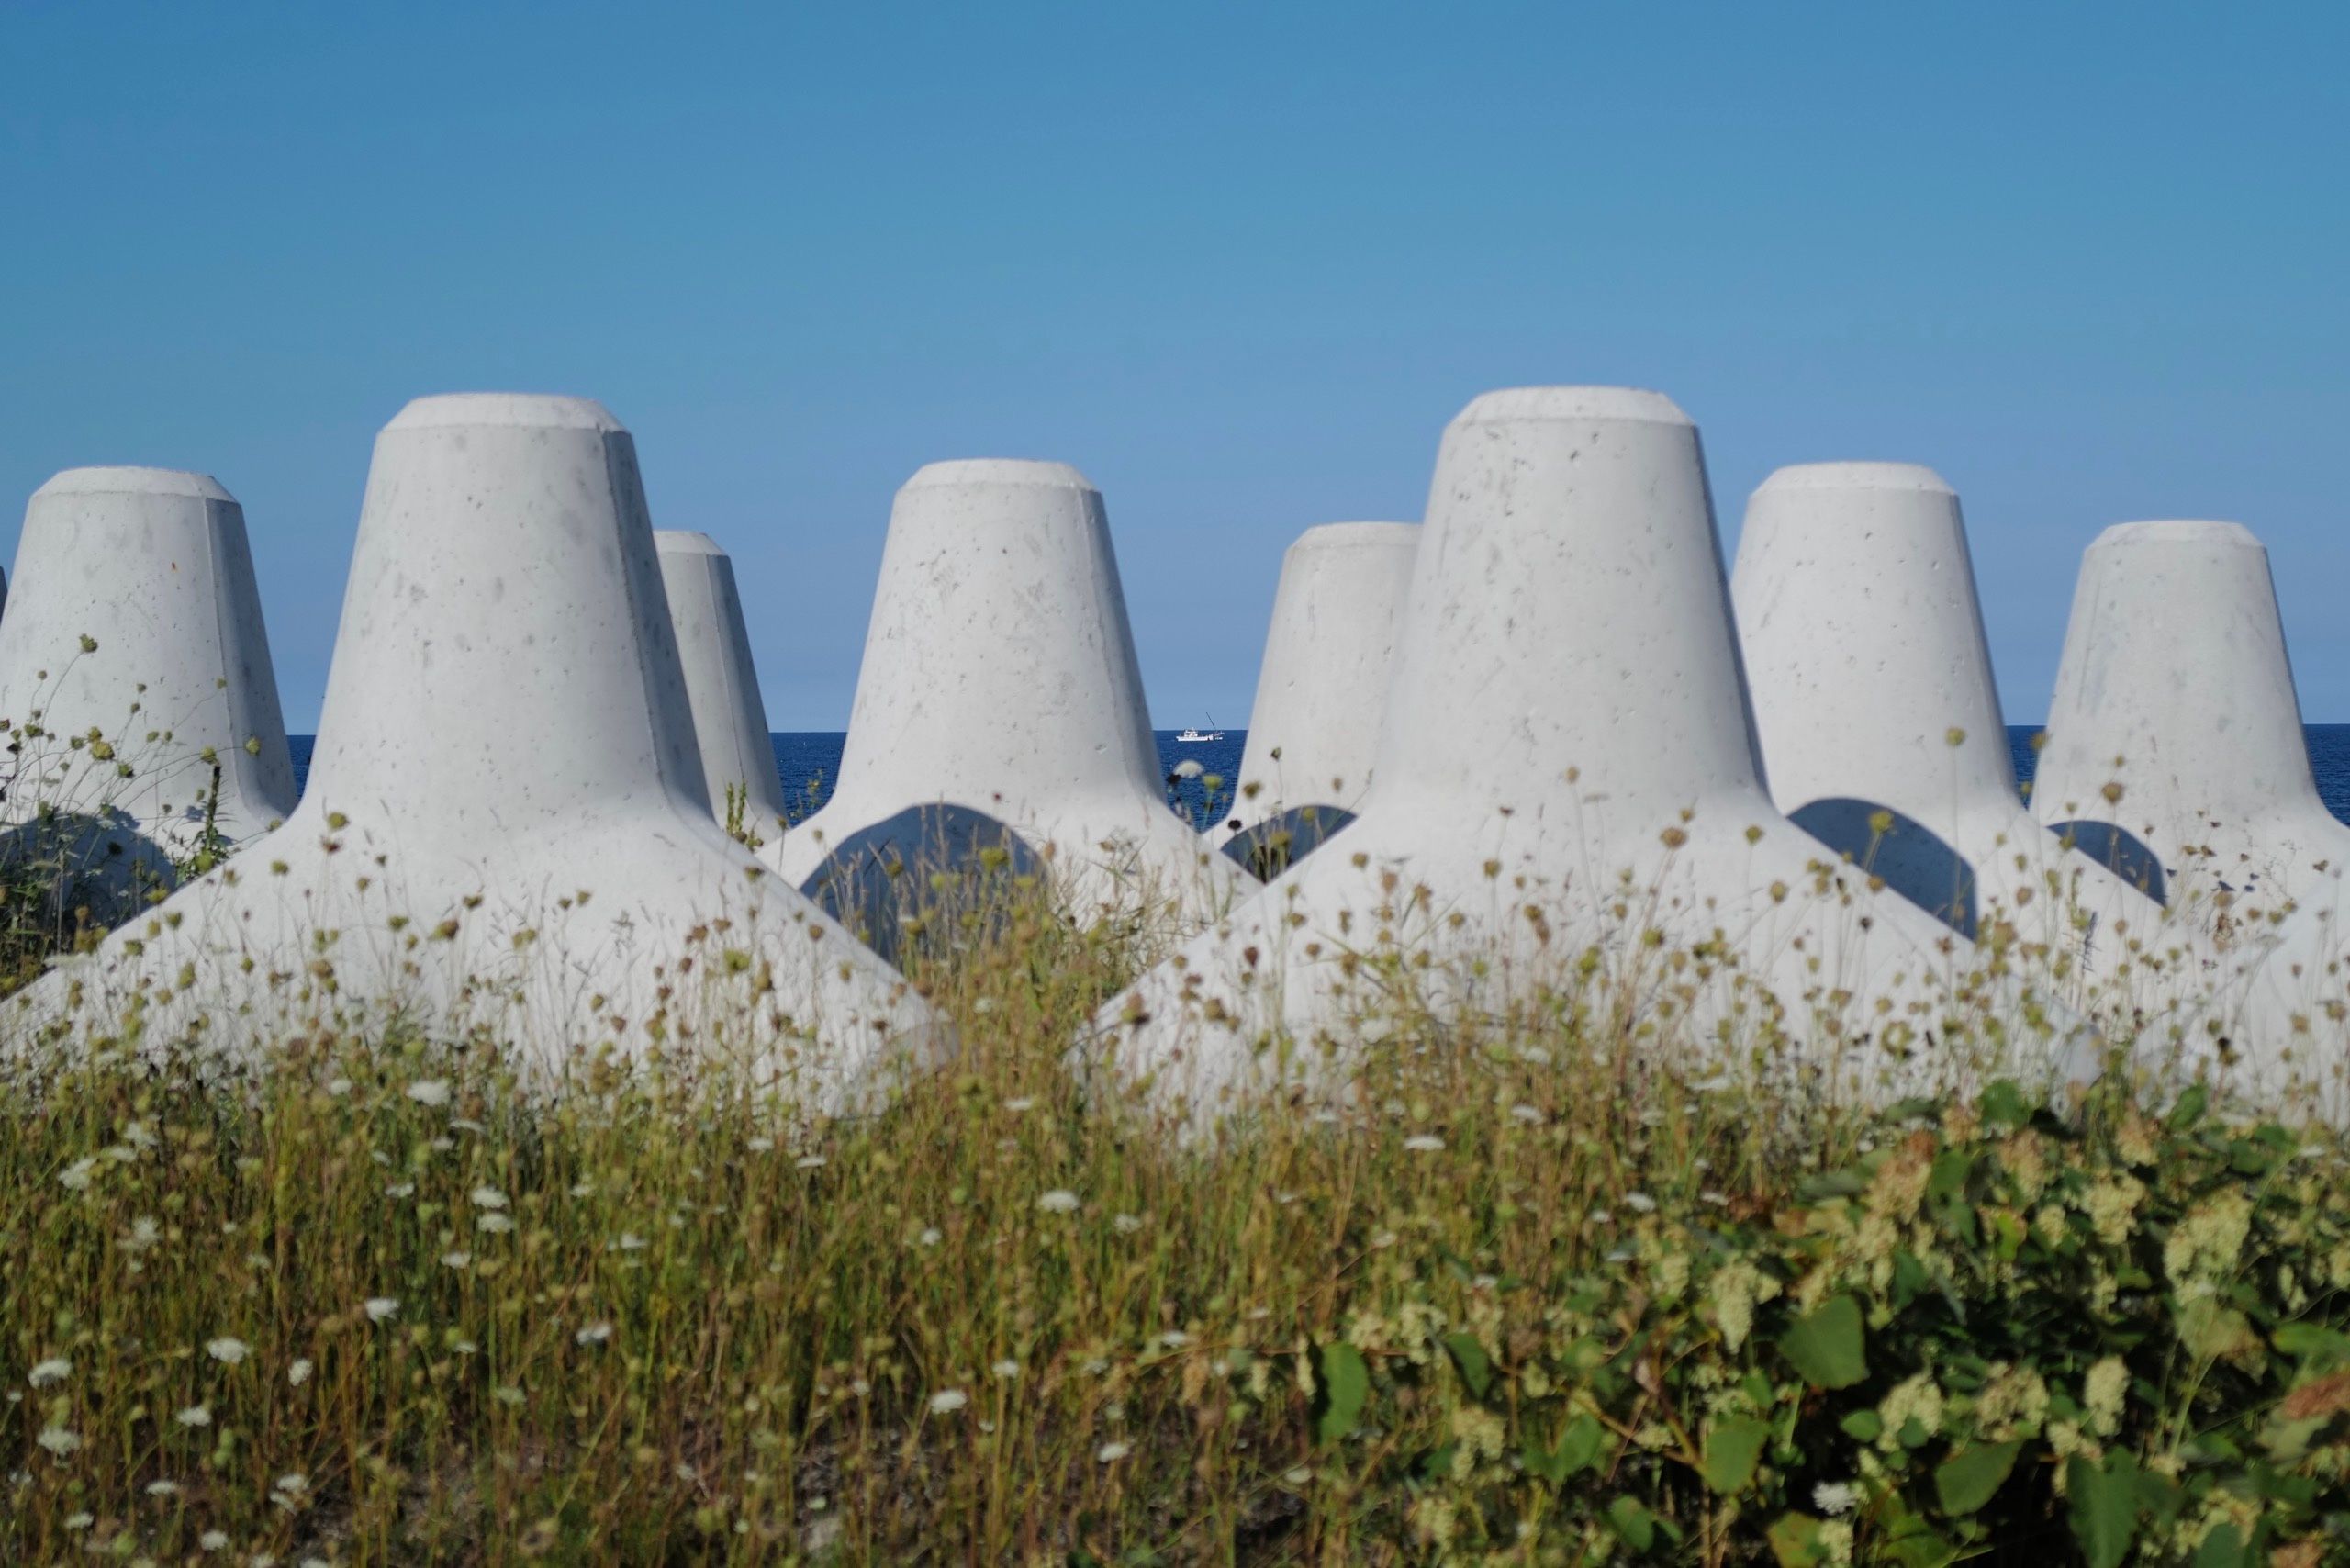 A tiny white fishing boat is visible through a line of concrete tetrapods on a beach